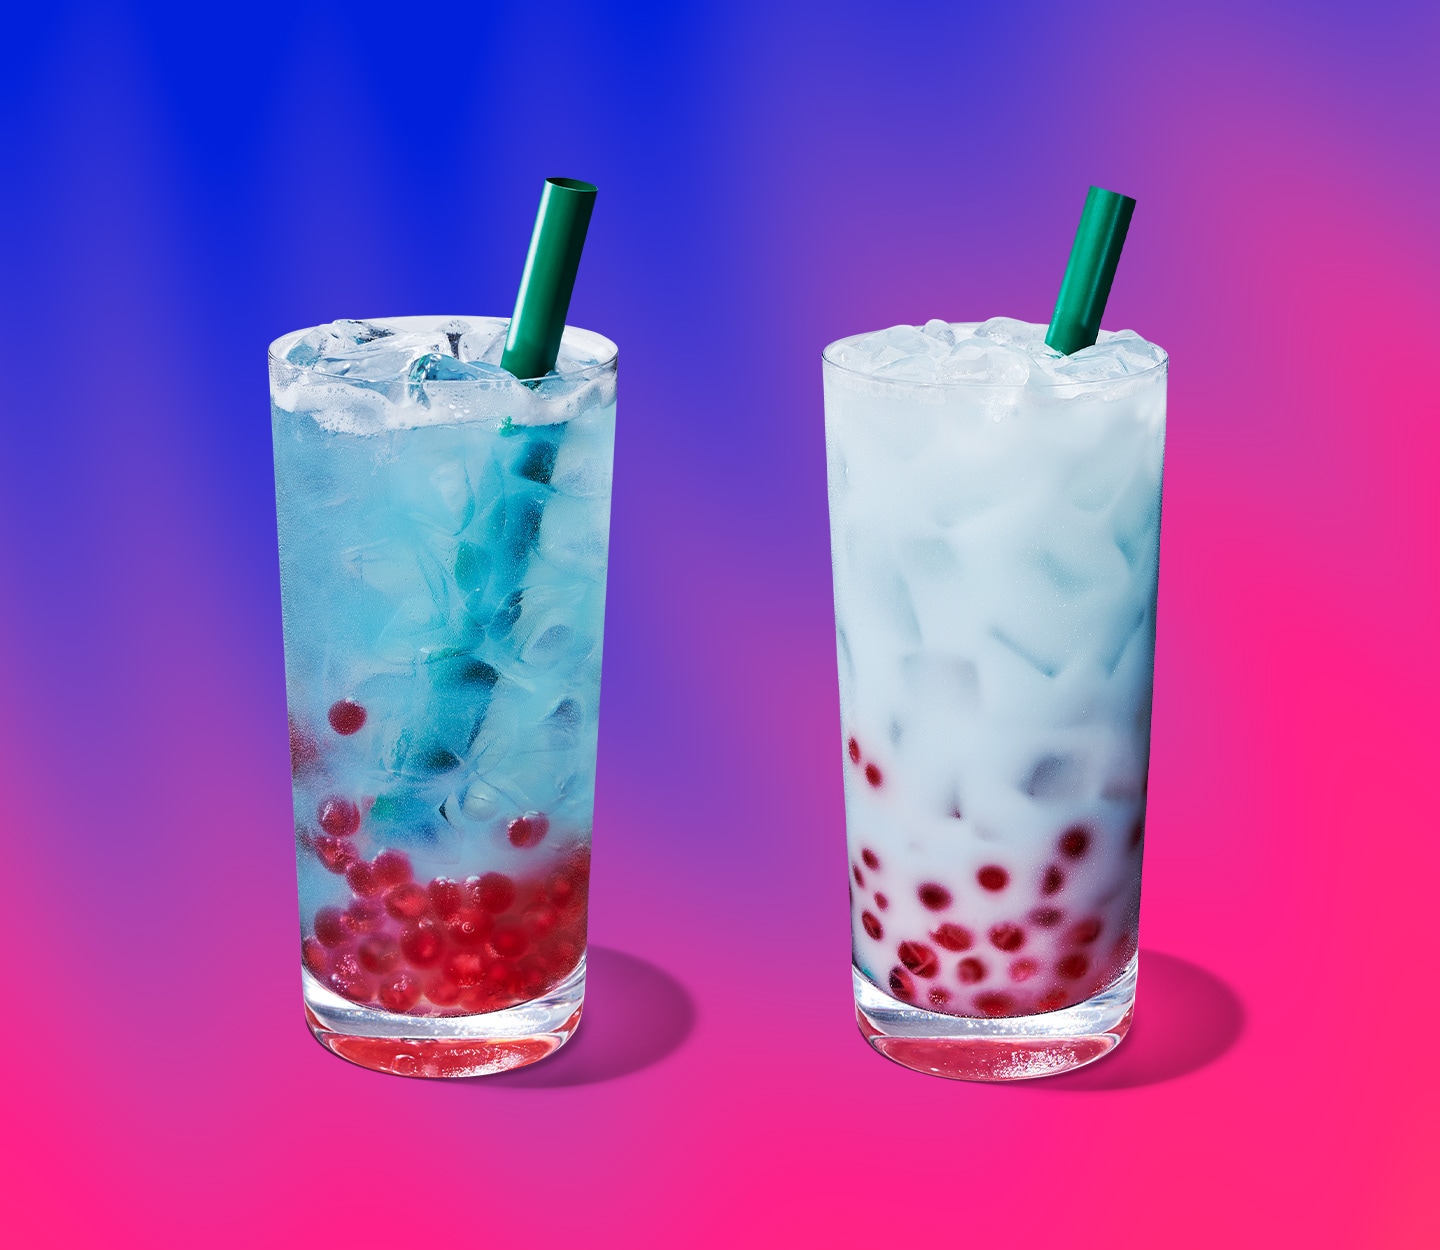 Two blue iced drinks with pink pearls at the bottom, the one on the right is creamy with coconut milk.